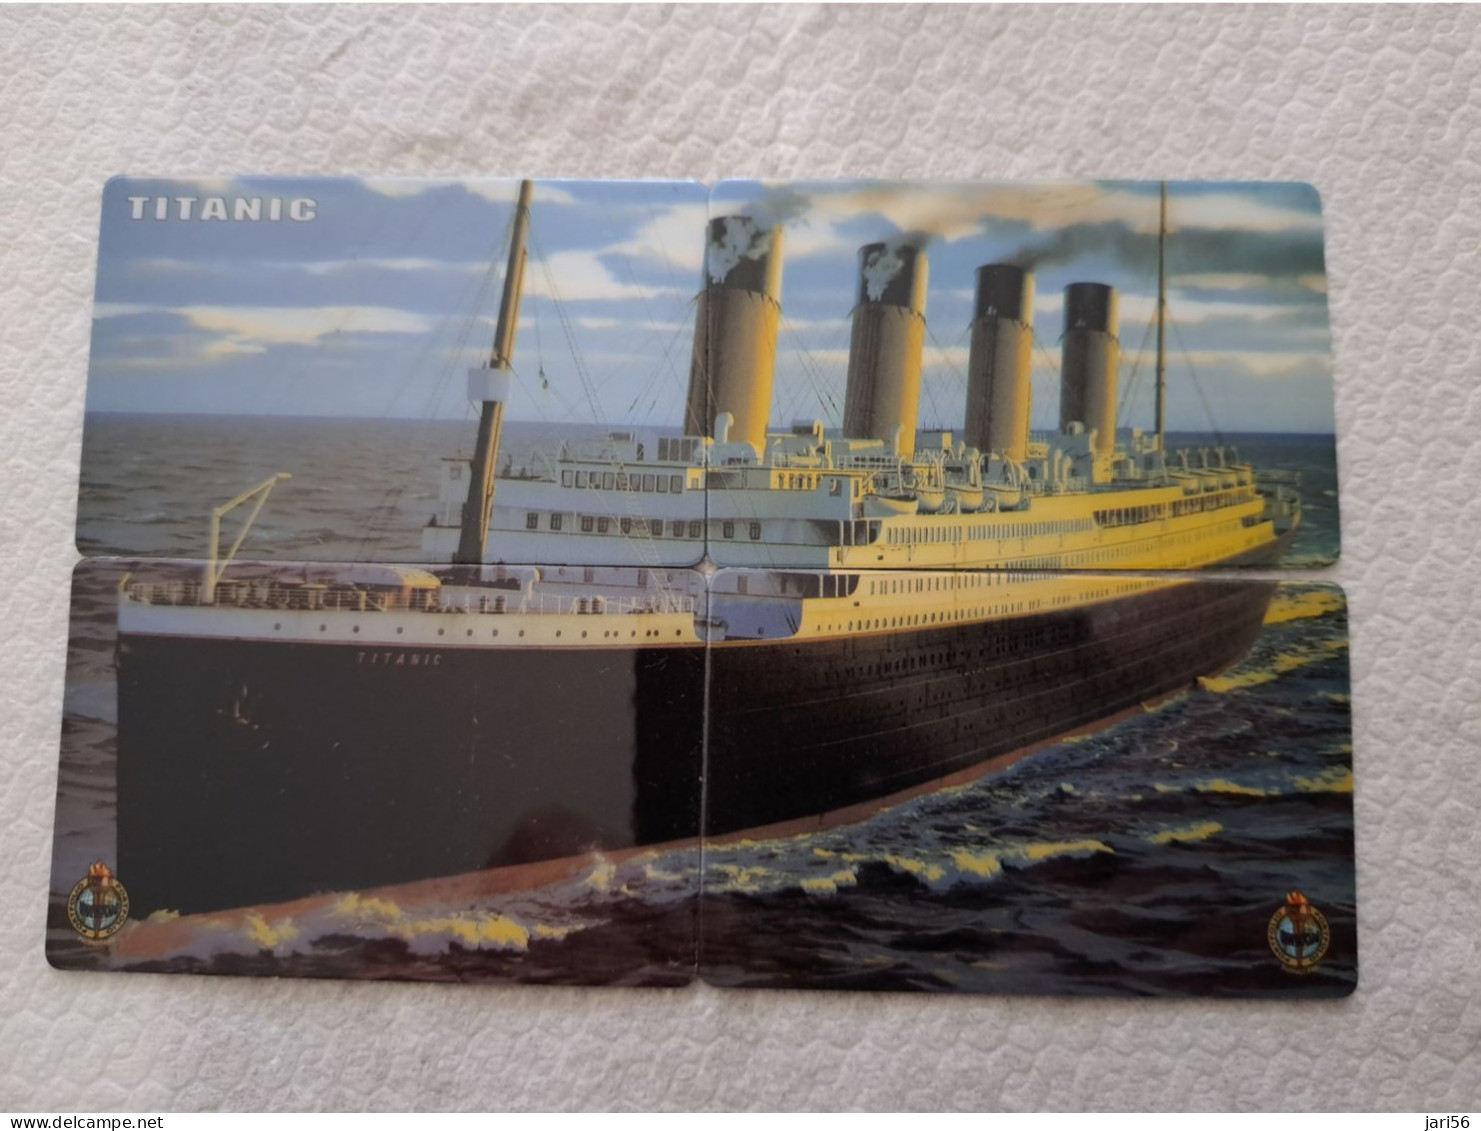 GREAT BRITAIN /20 UNITS / TITANIC/ PUZZLE   PREPAID  4CARDS / LIMITED EDITION/ MINT  **14466** - Collections